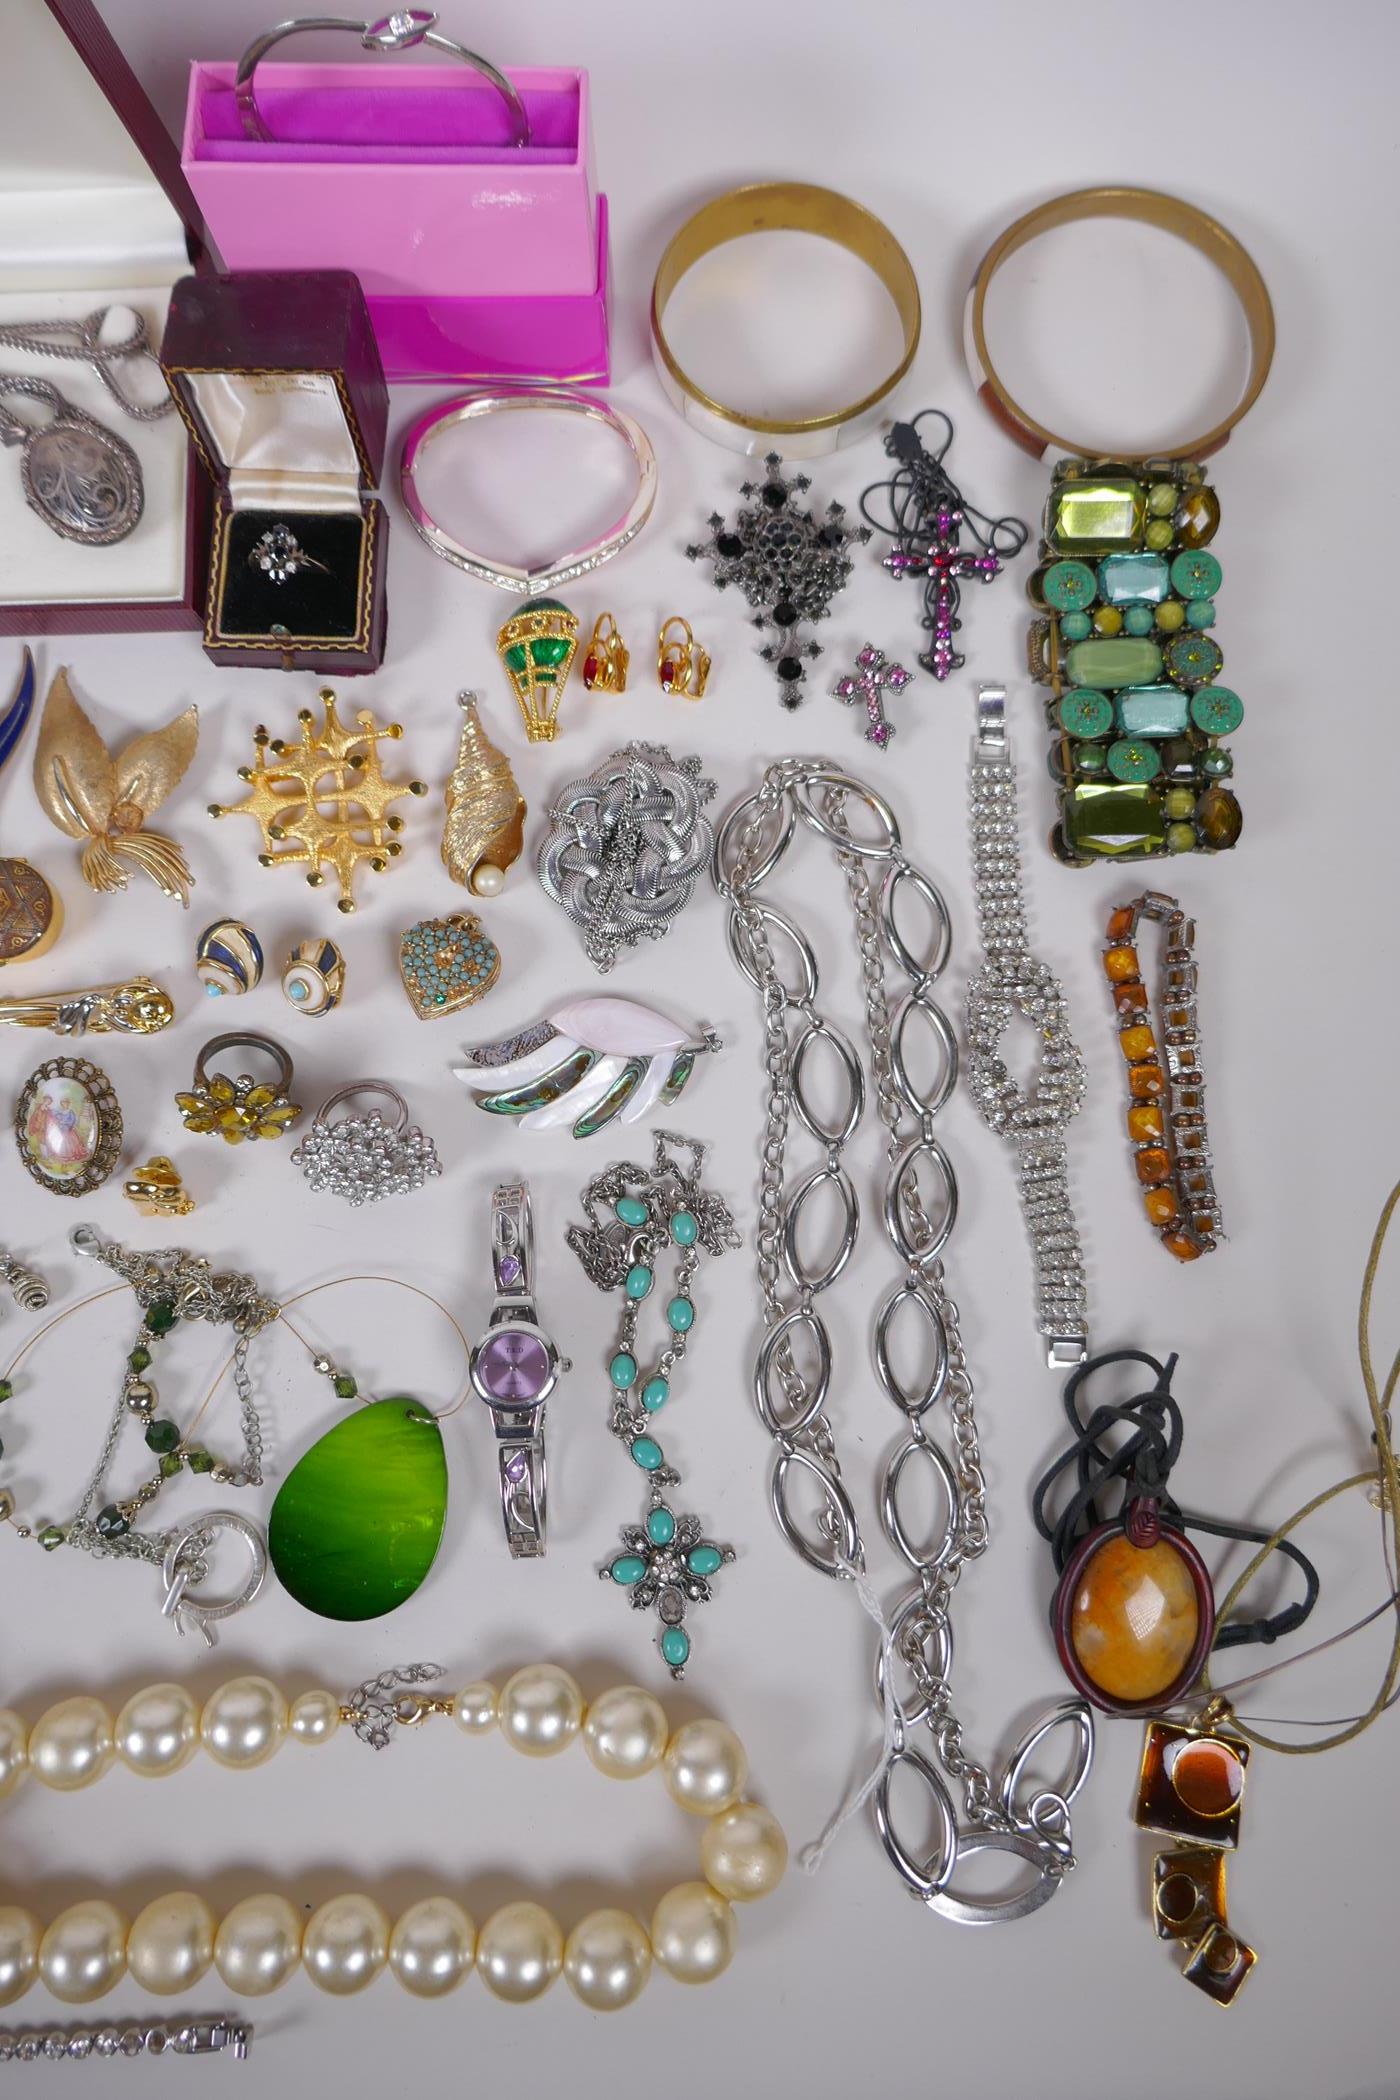 An assortment of vintage costume jewellery including bangles, necklaces, earrings, rings etc - Image 5 of 7